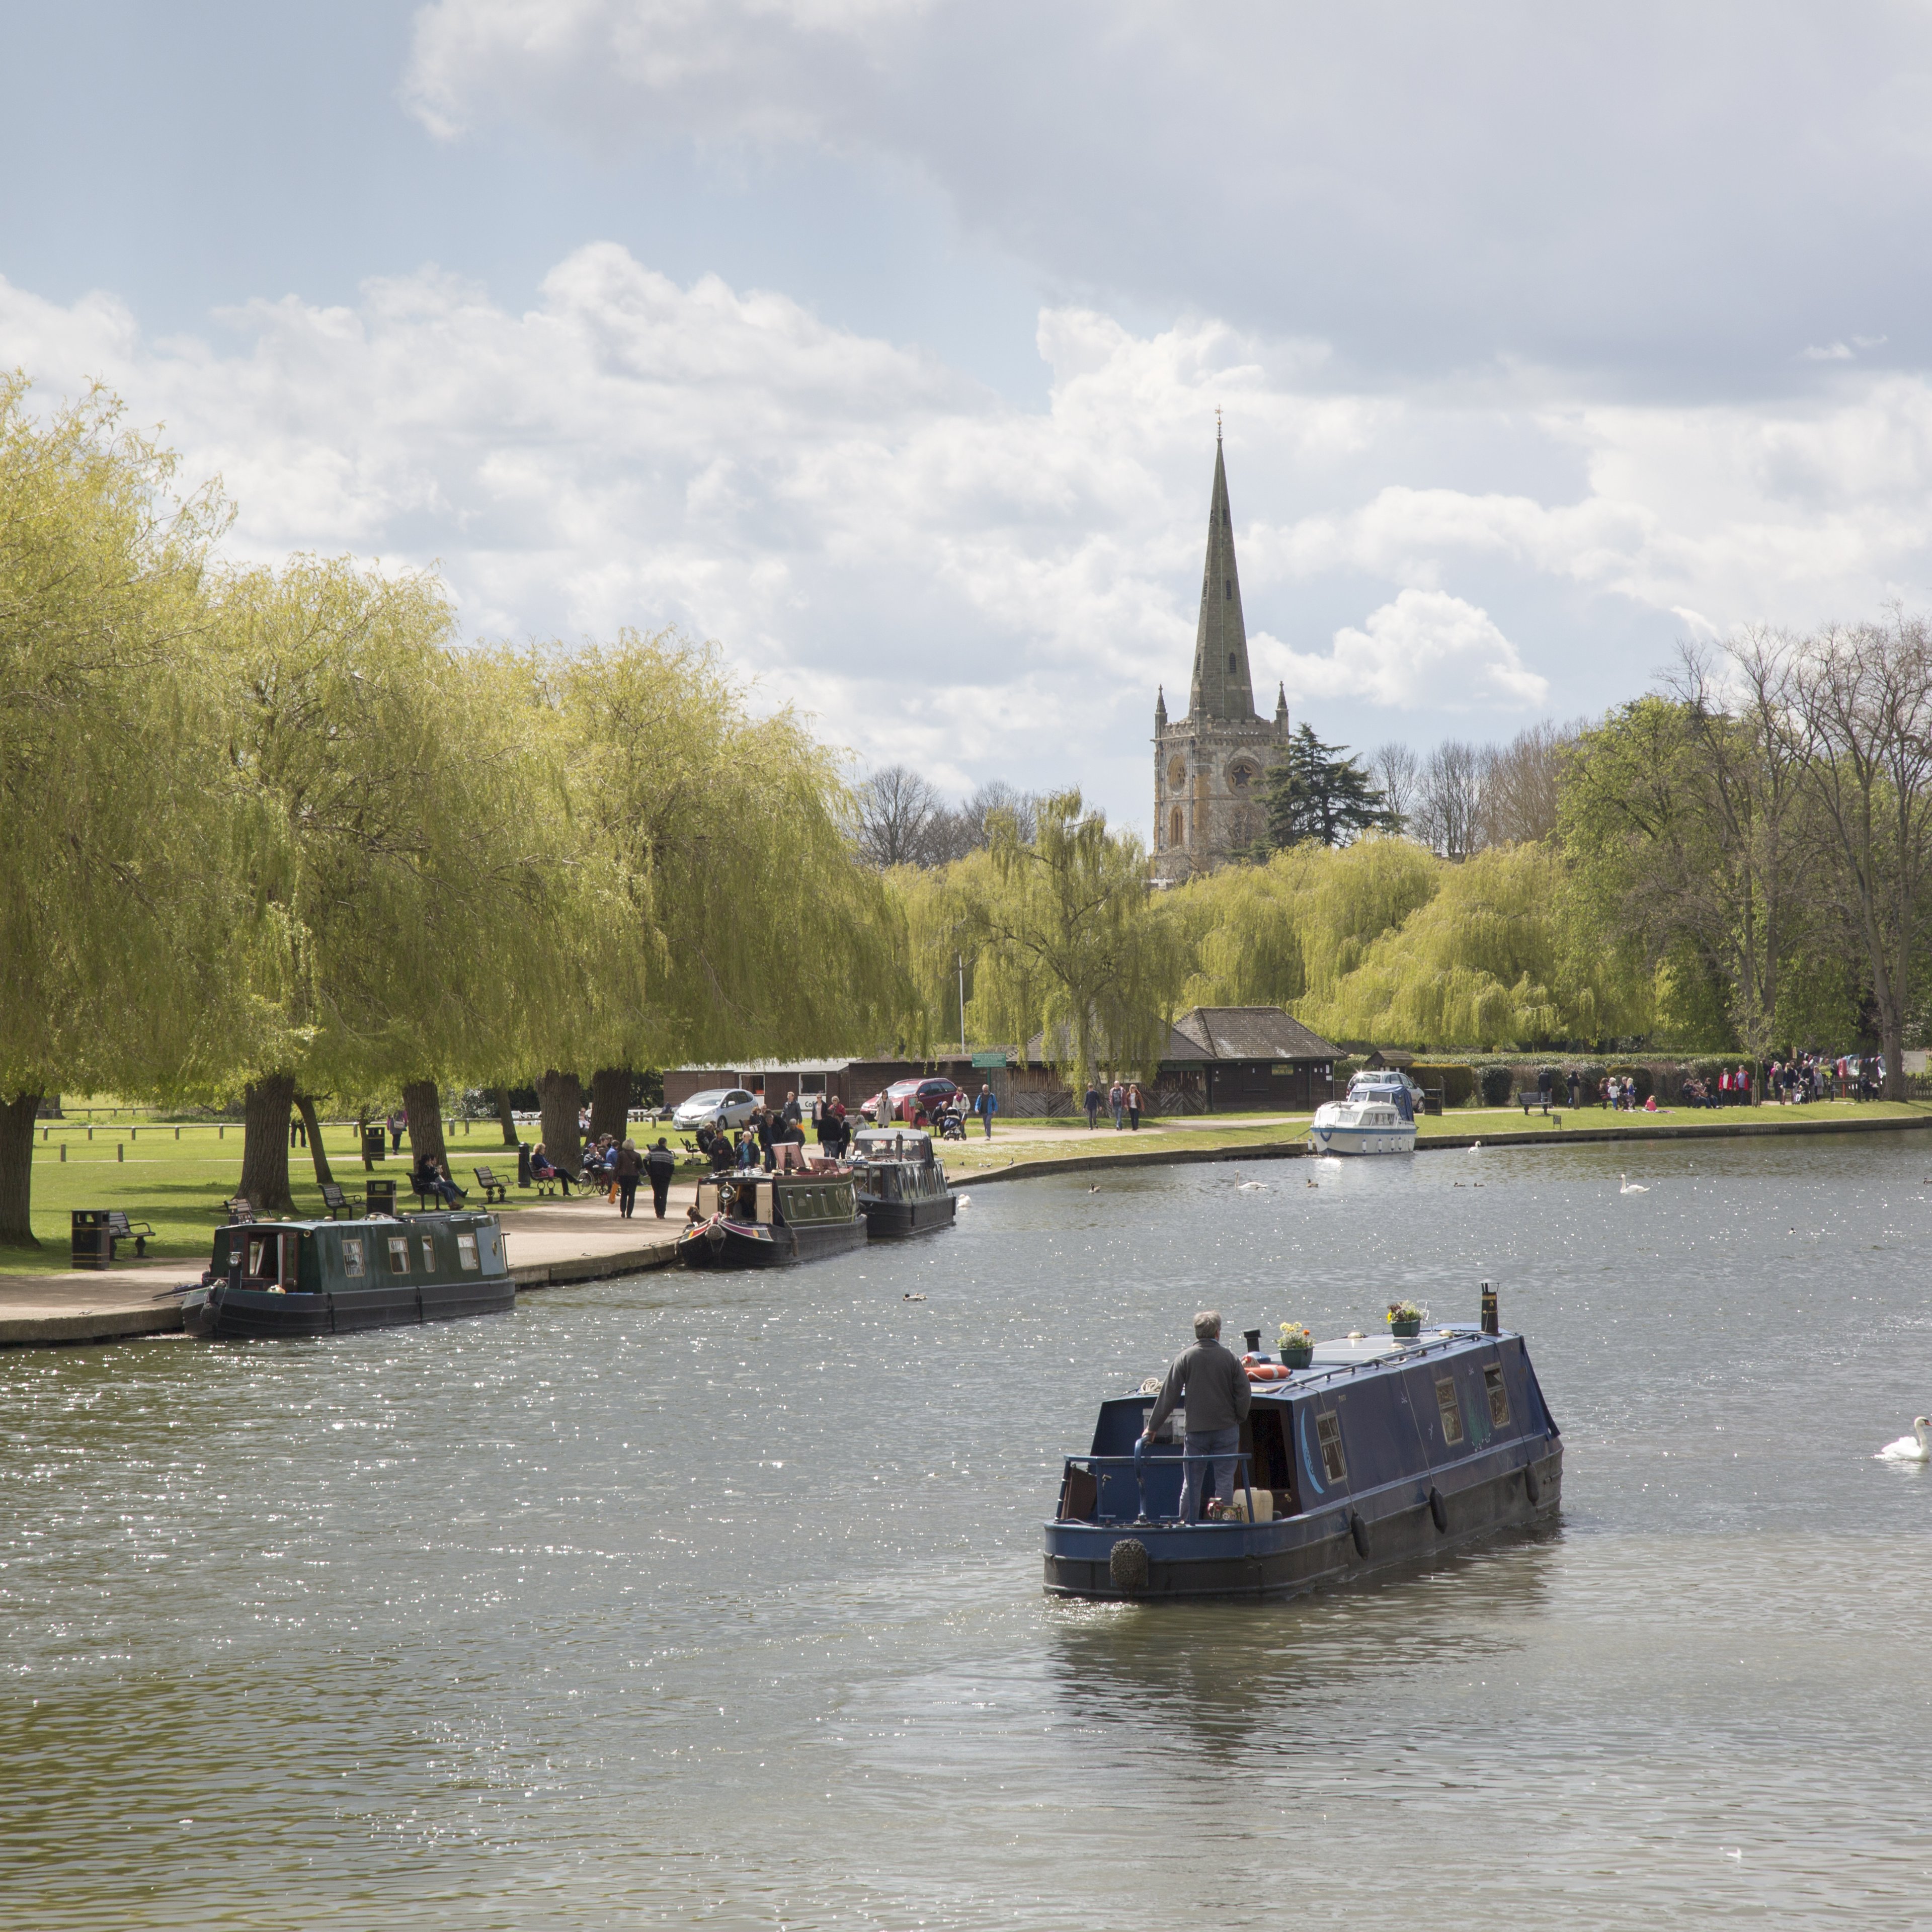 Narrowboats on the river Avon with the catherdral in the background.